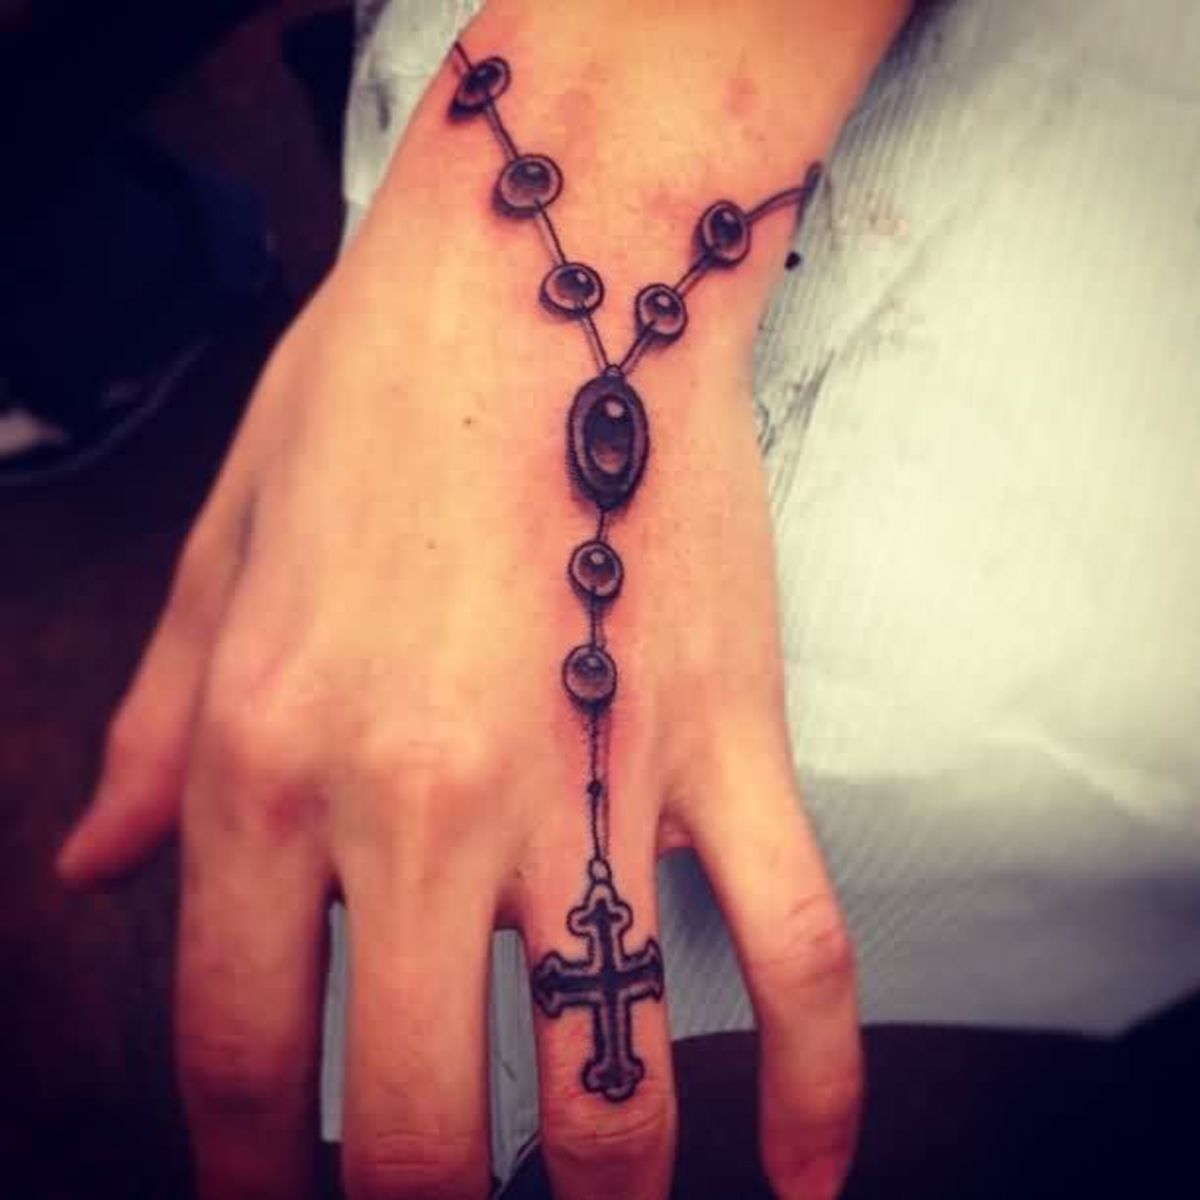 Rosary Bead Tattoo Ideas, Designs, and Meanings | TatRing How To Wear A Rosary Around Your Wrist